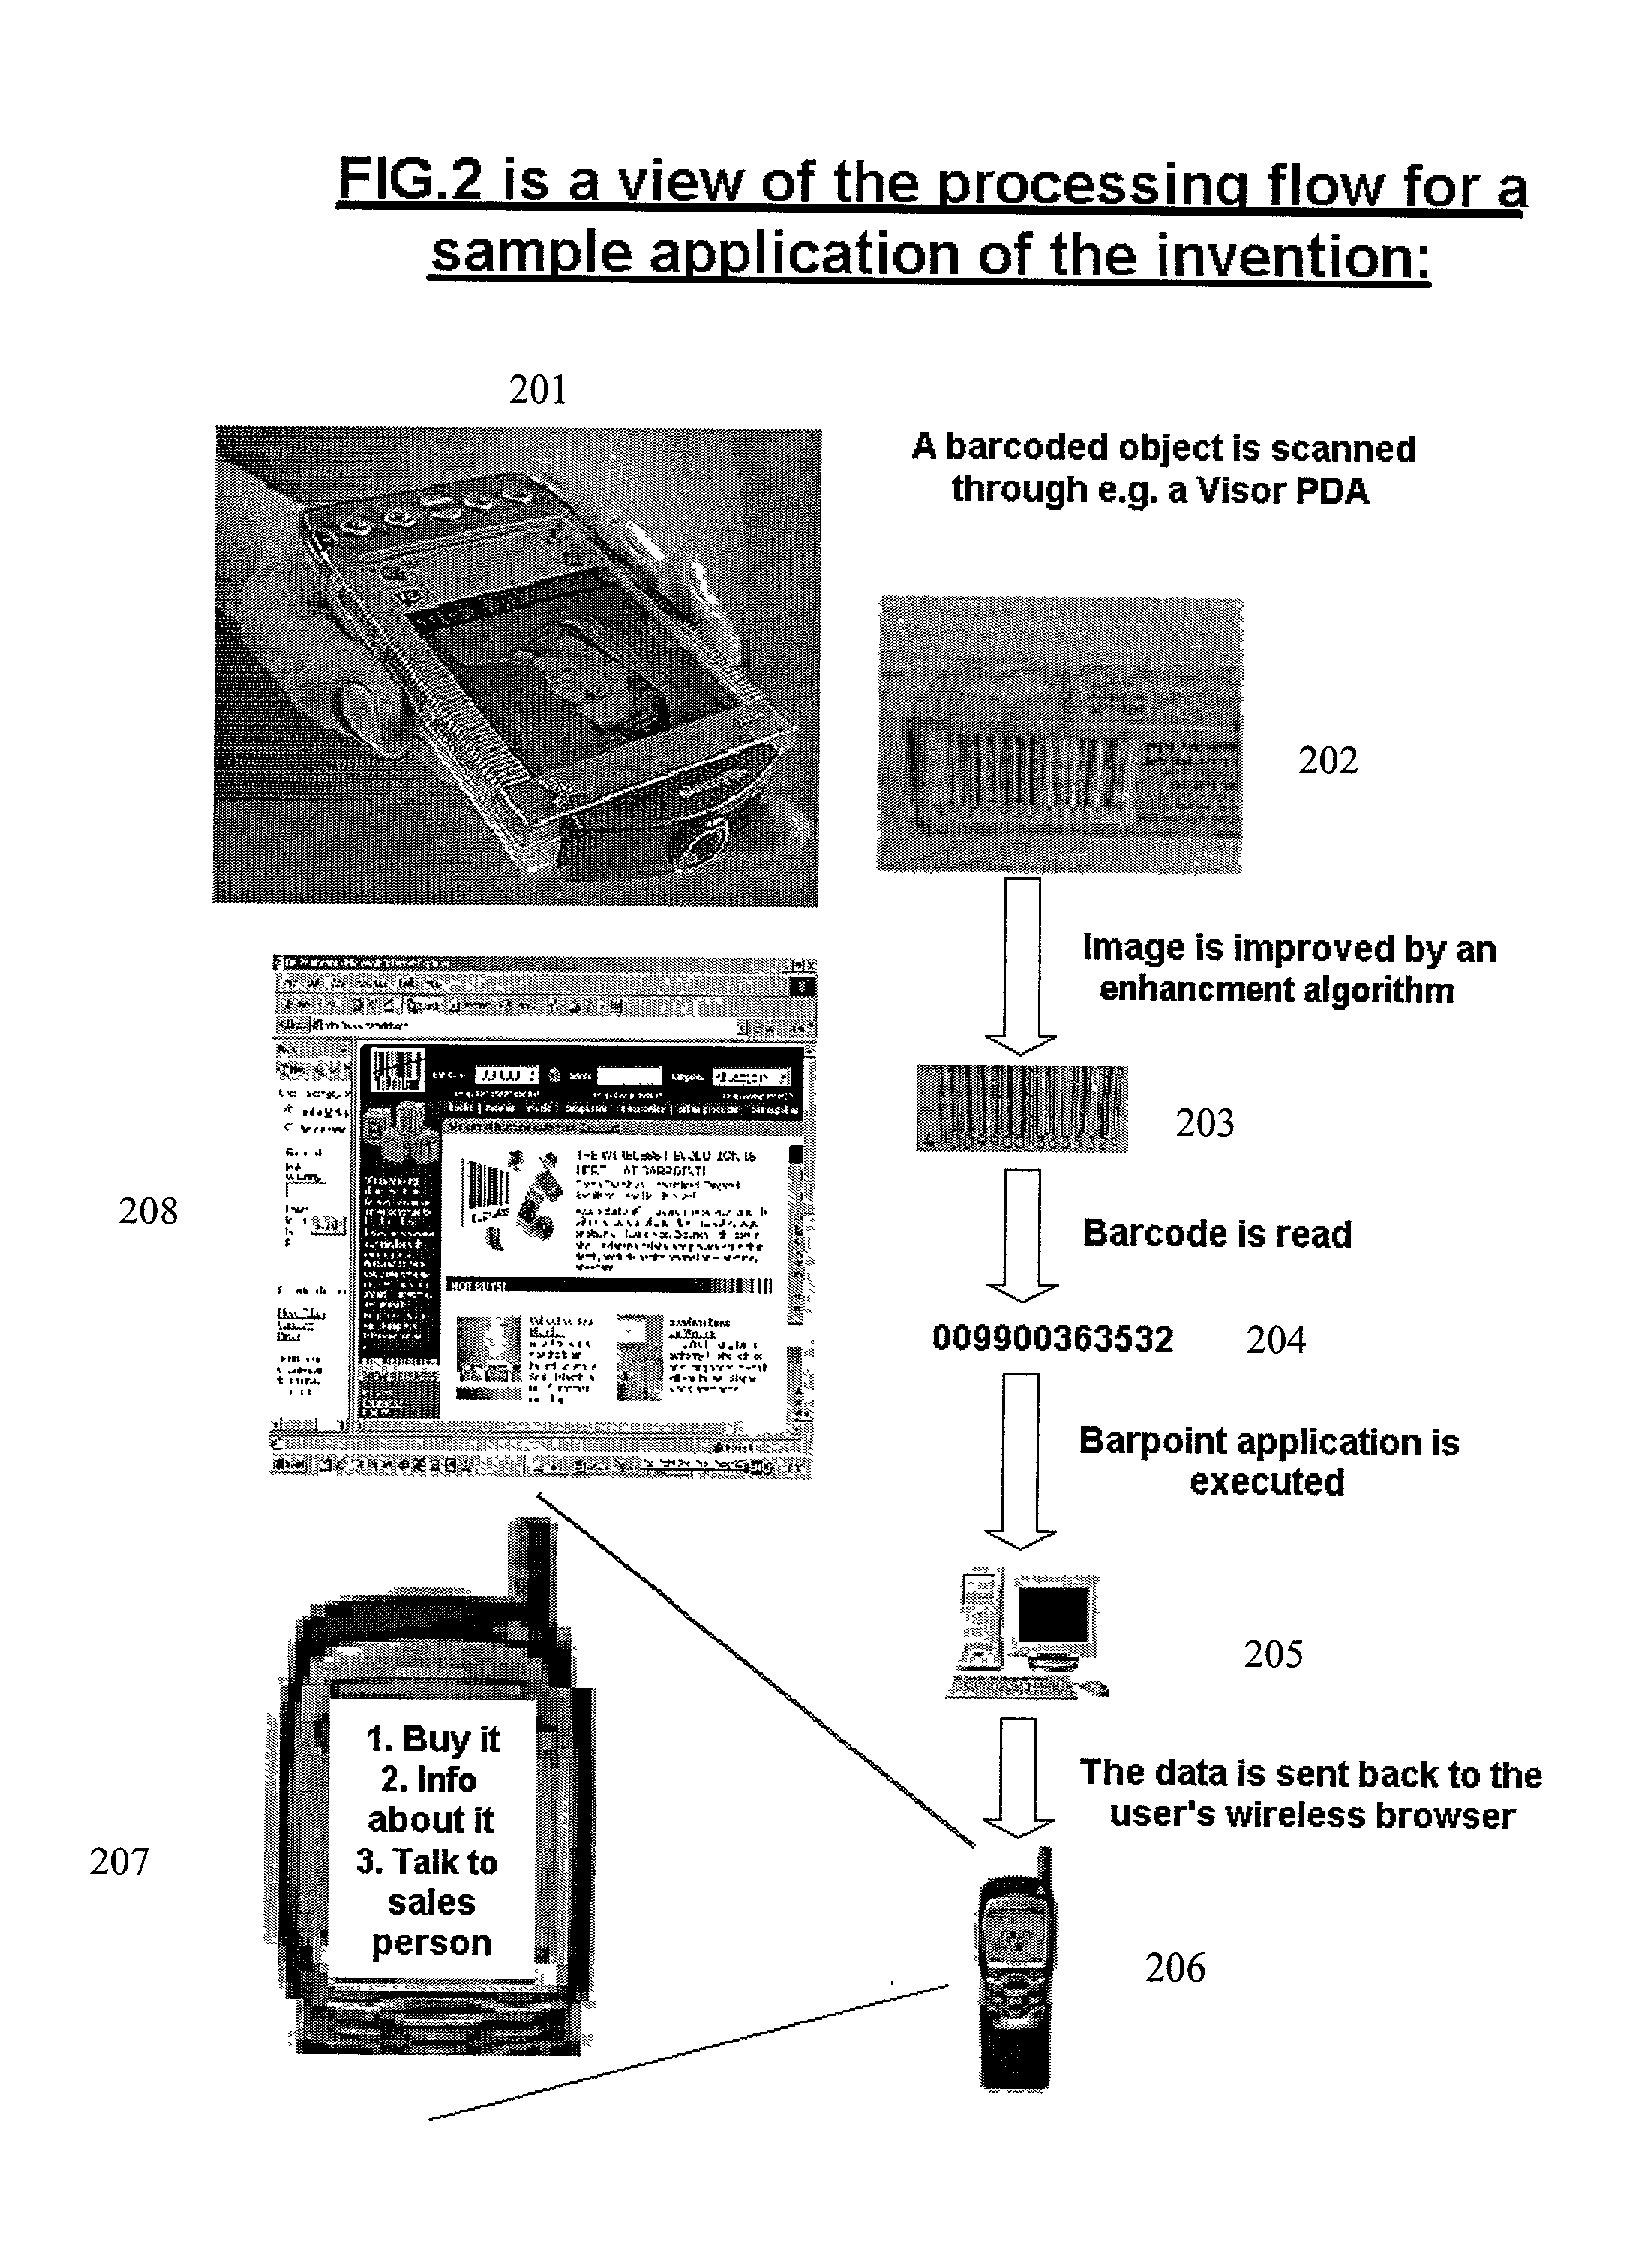 Object identification method for portable devices